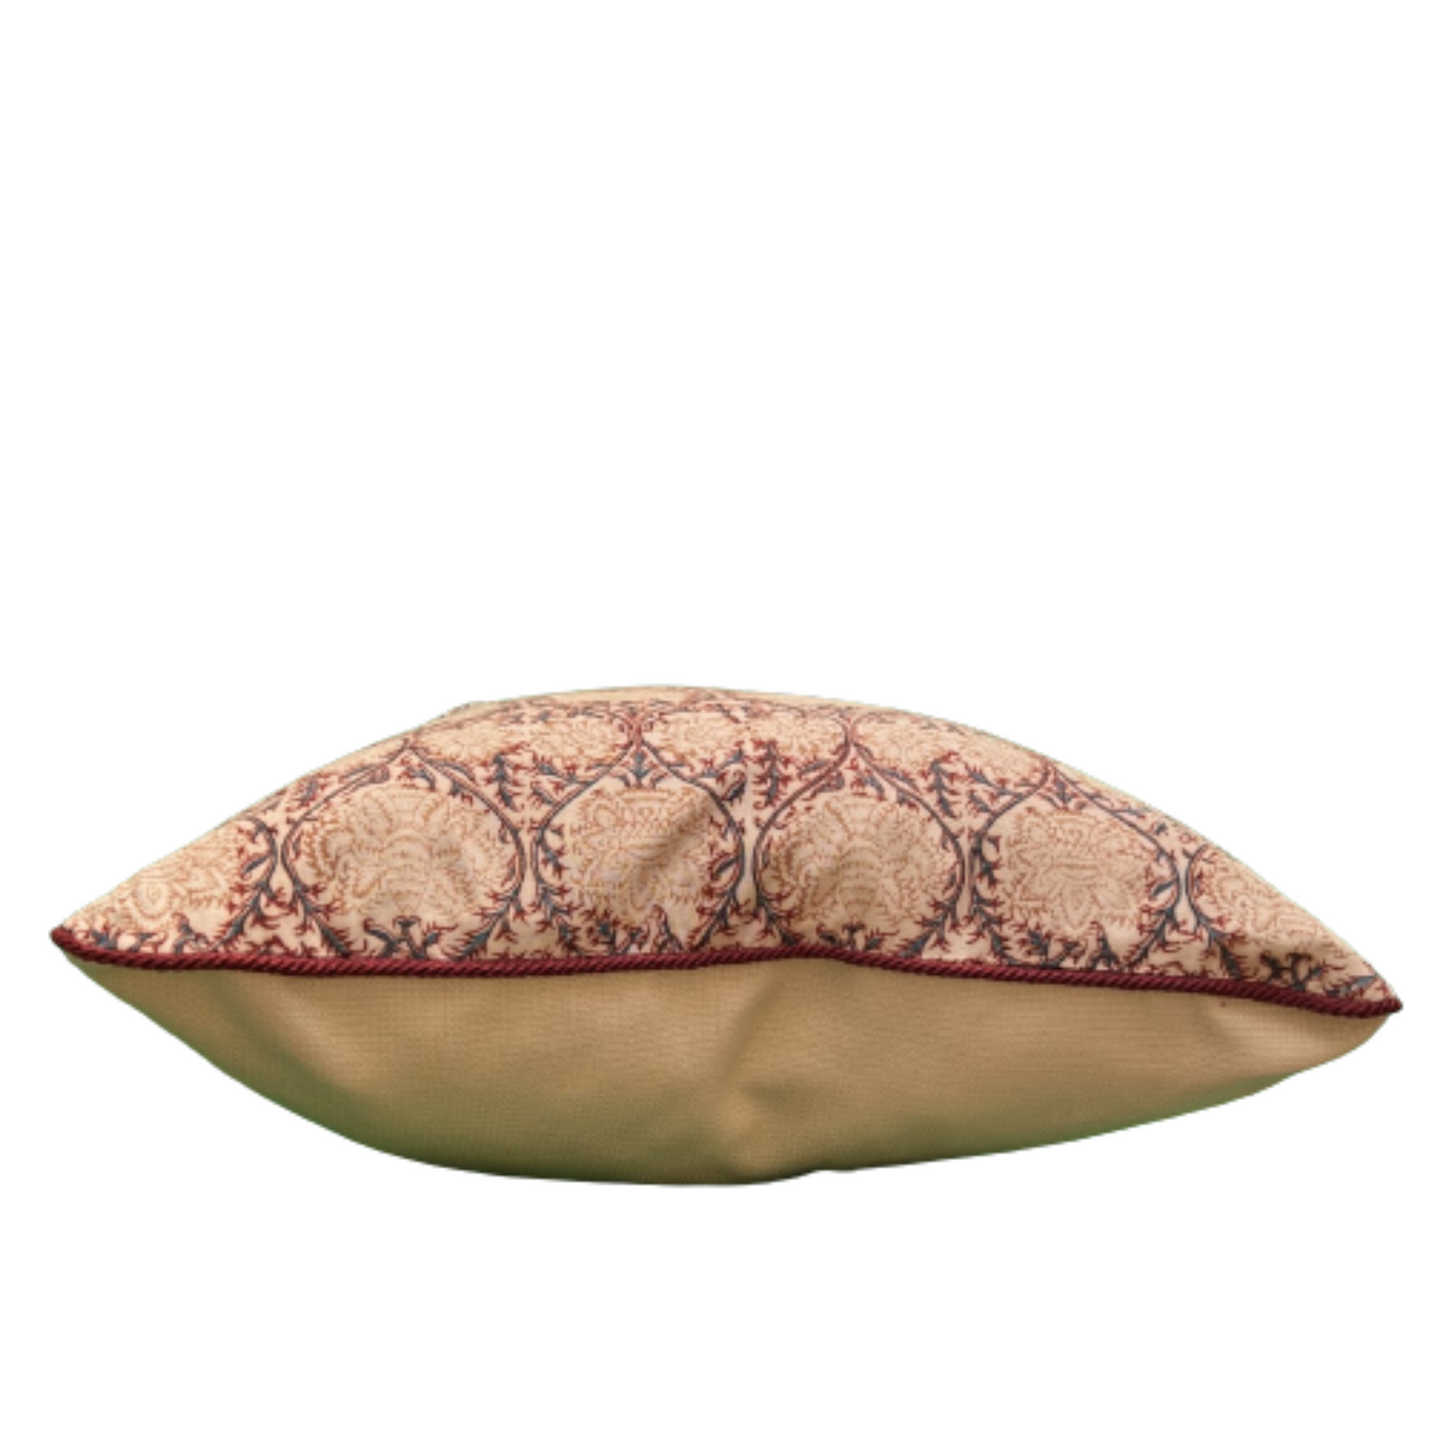 Priya Les Indiennes 20 x 20 Decorative Pillow with Down Feather Insert